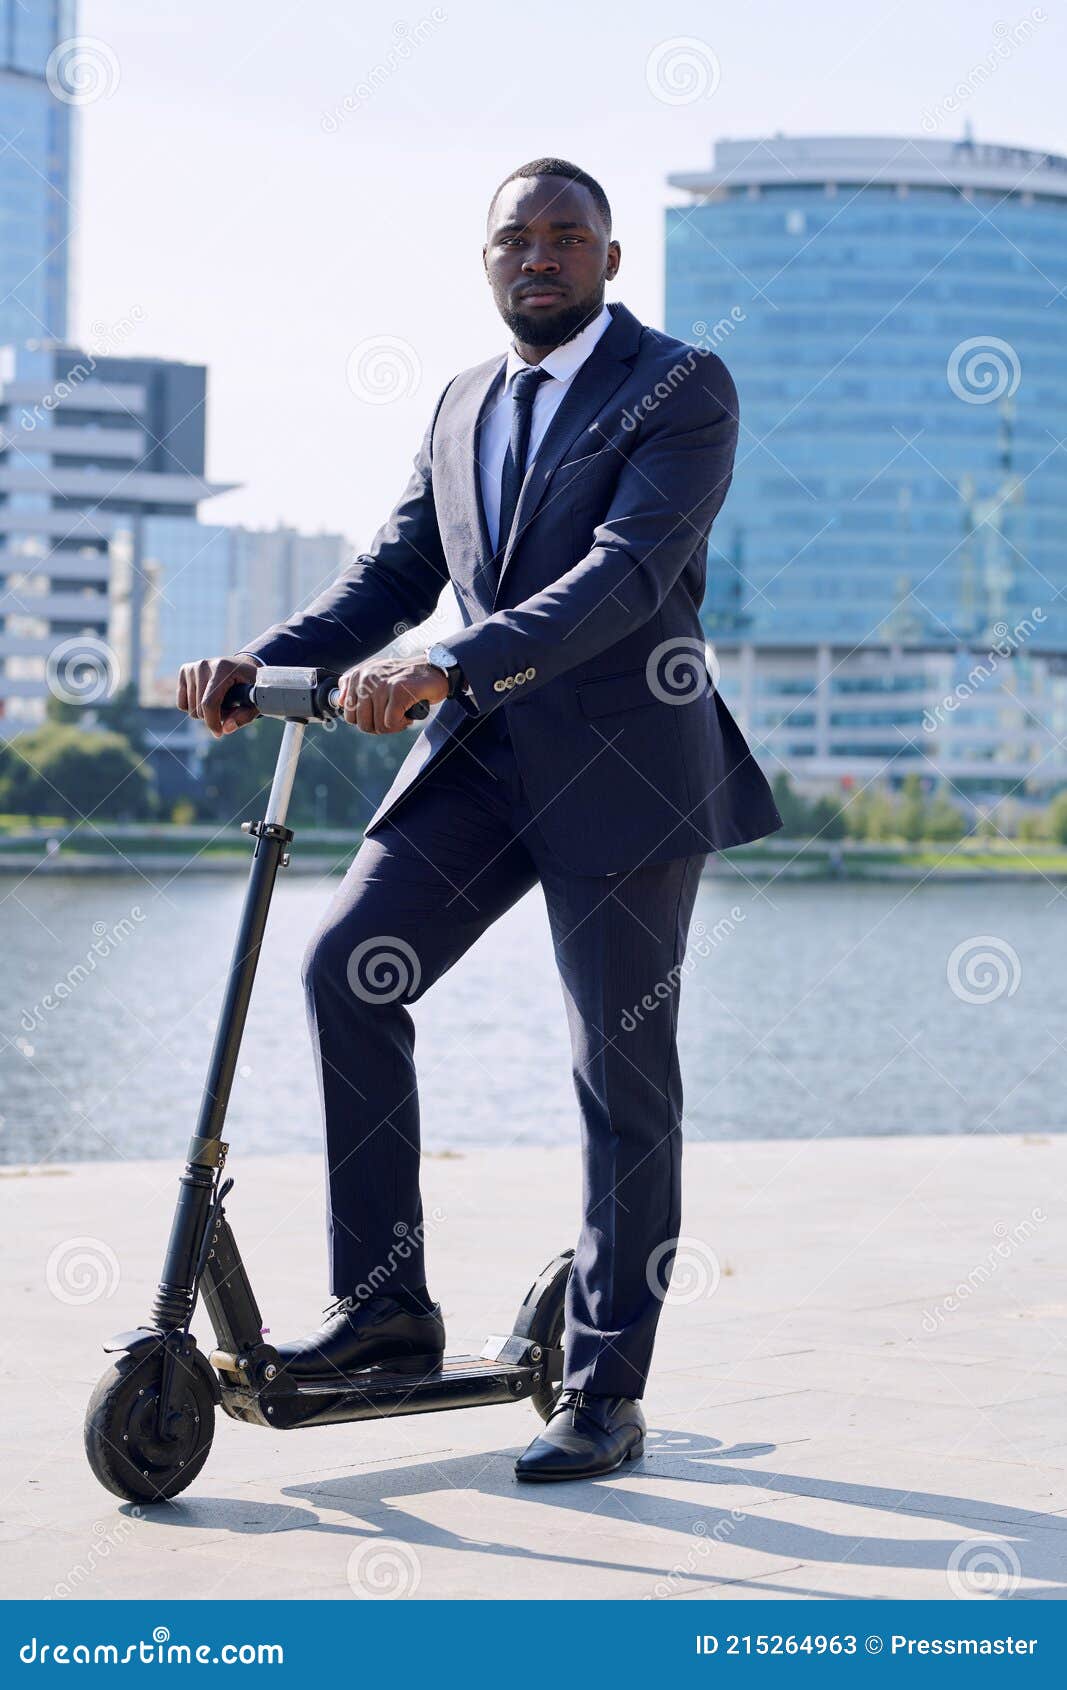 Converge Korn Med det samme Young Serious African Businessman in Formalwear Standing on Electric Scooter  by Riverside Stock Image - Image of business, formalwear: 215264963